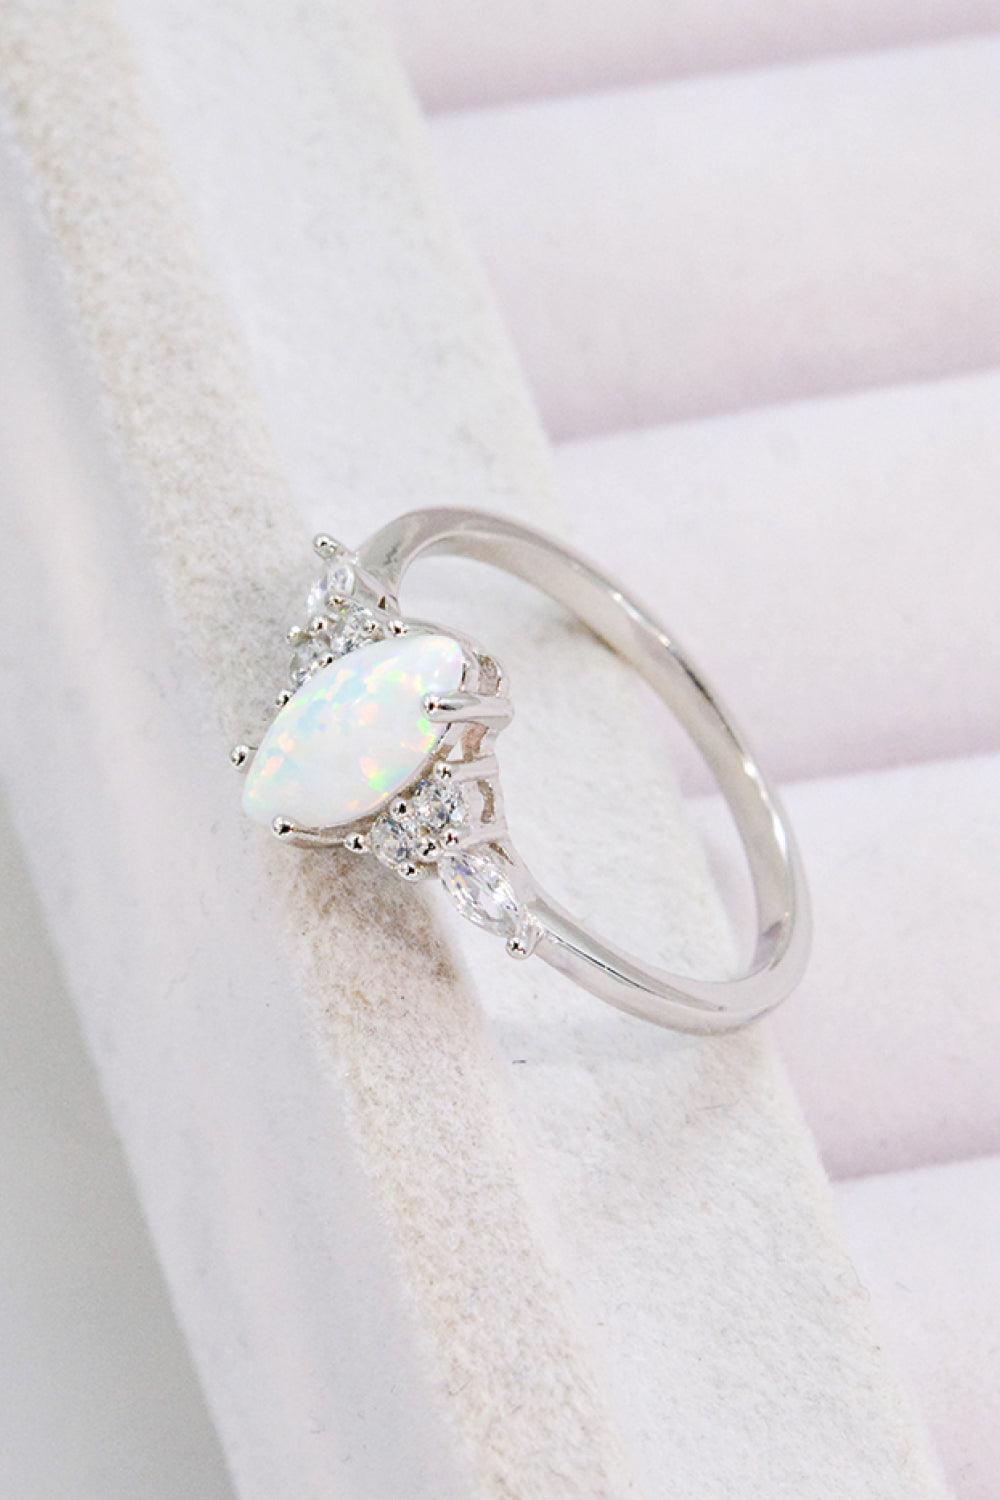 Opal and Zircon Platinum-Plated Ring - Crazy Like a Daisy Boutique #